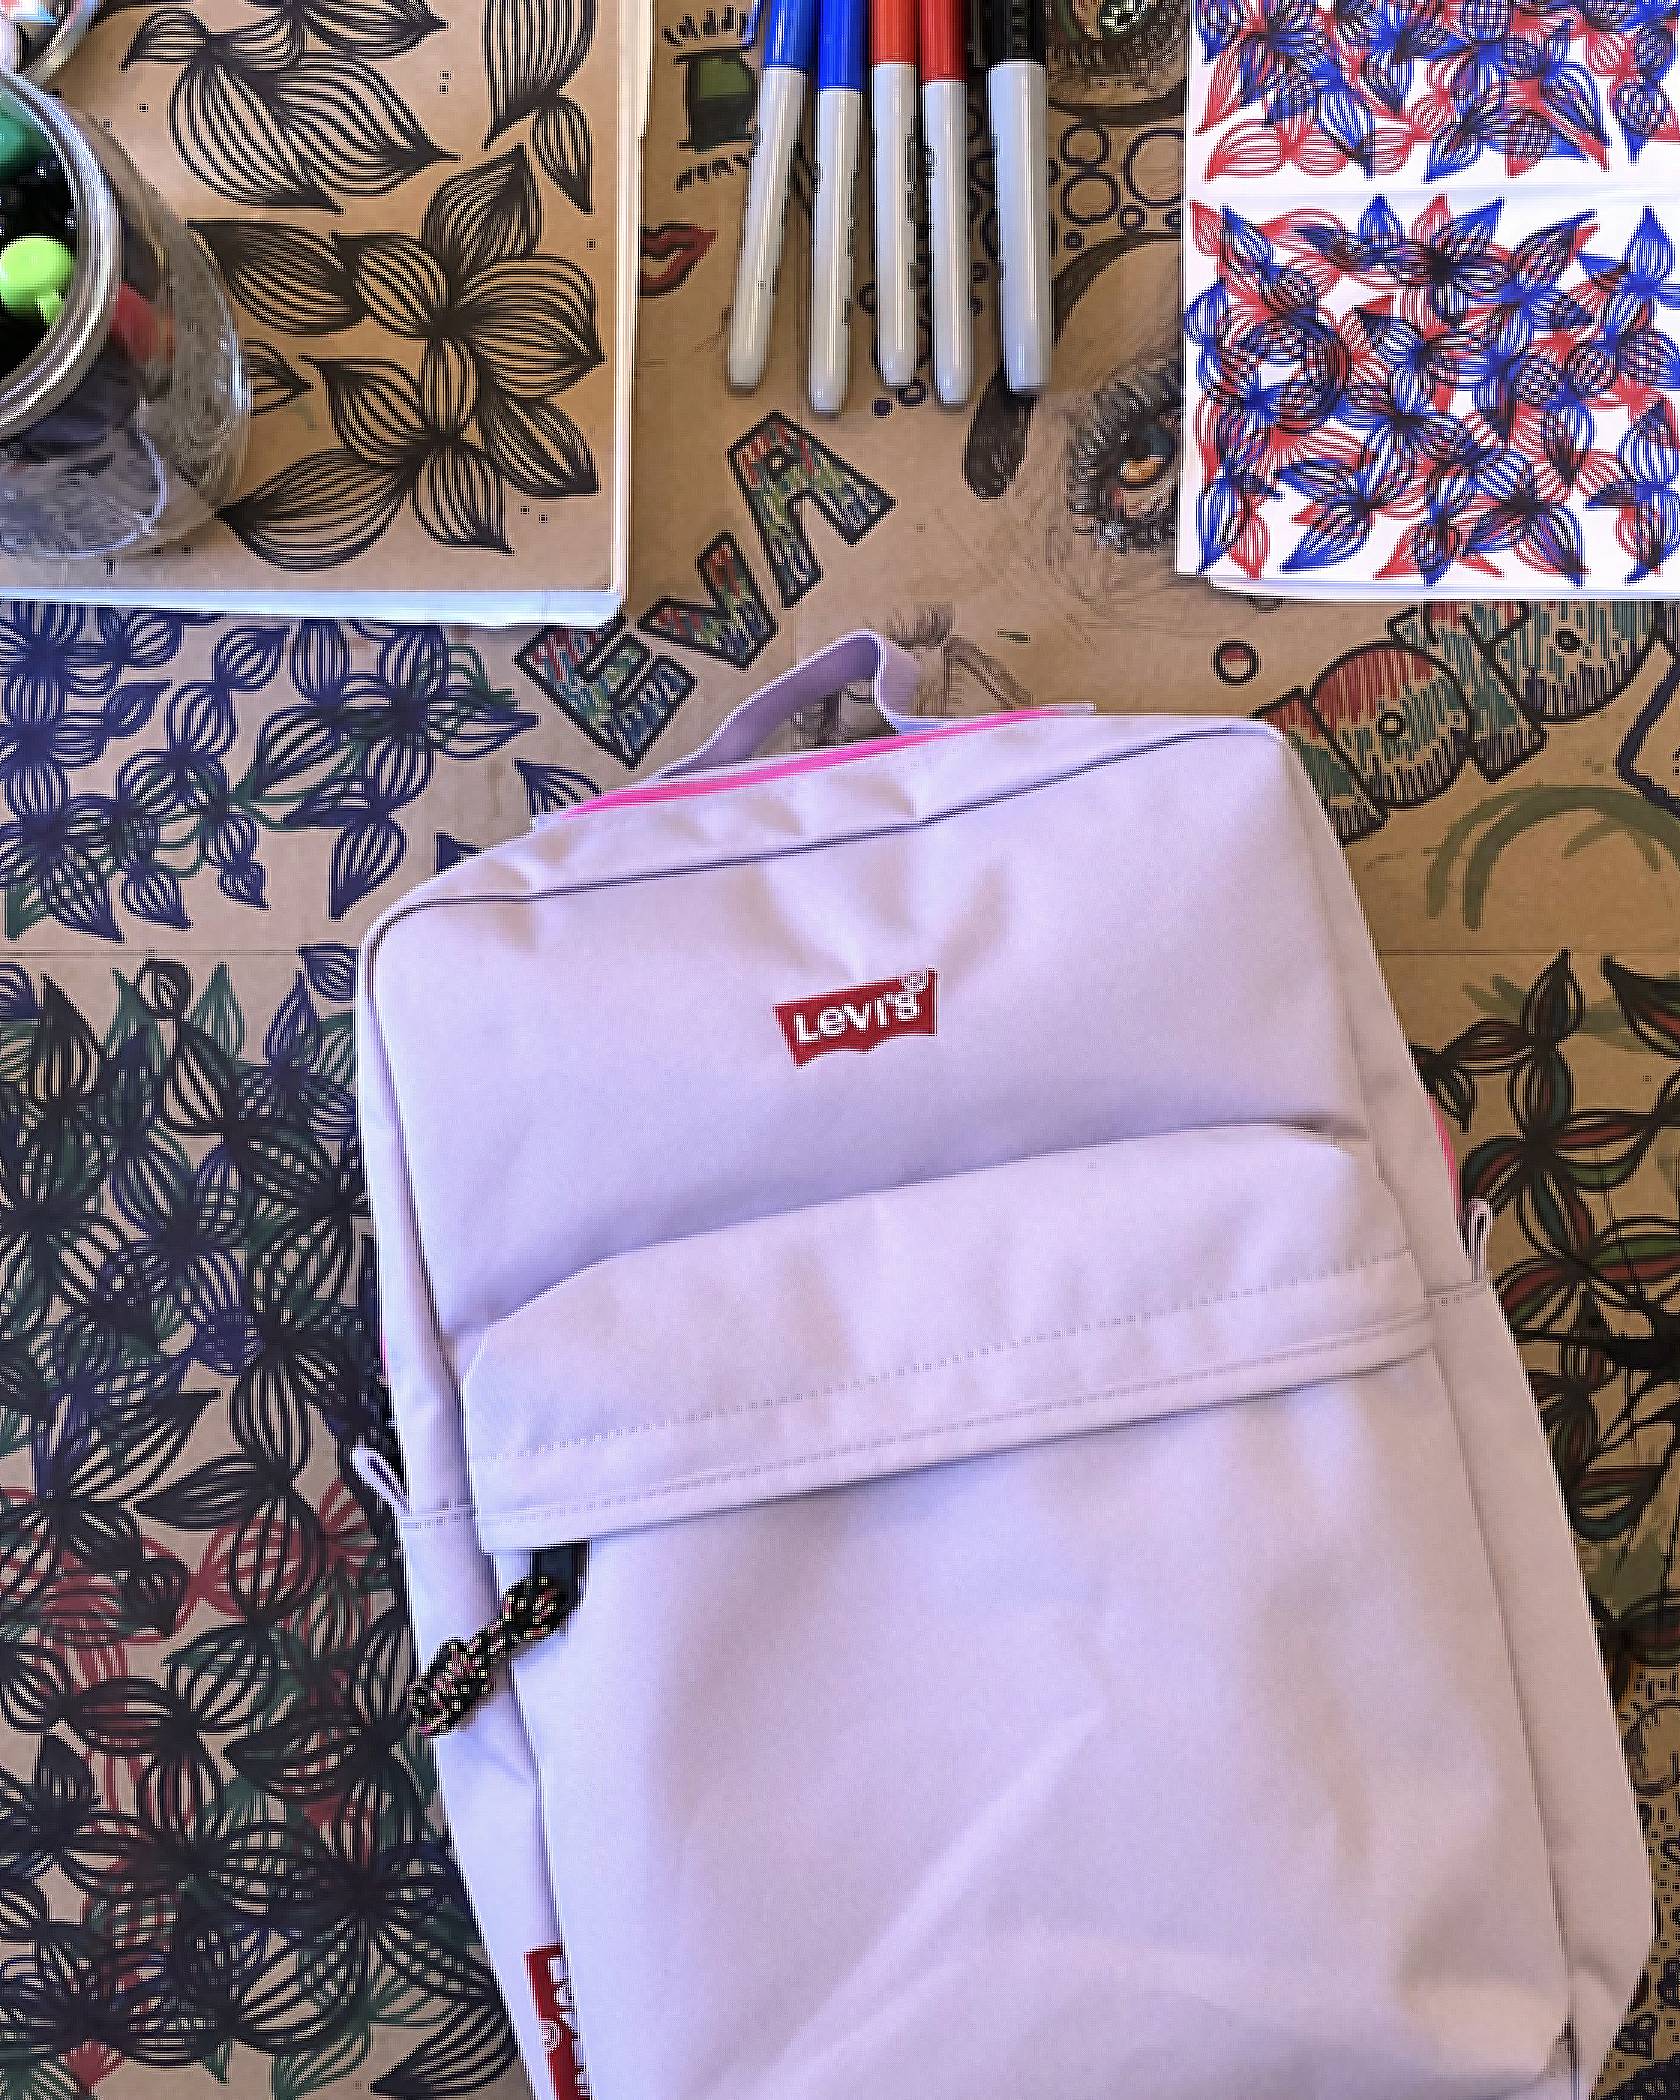 sharpies levi's backpack